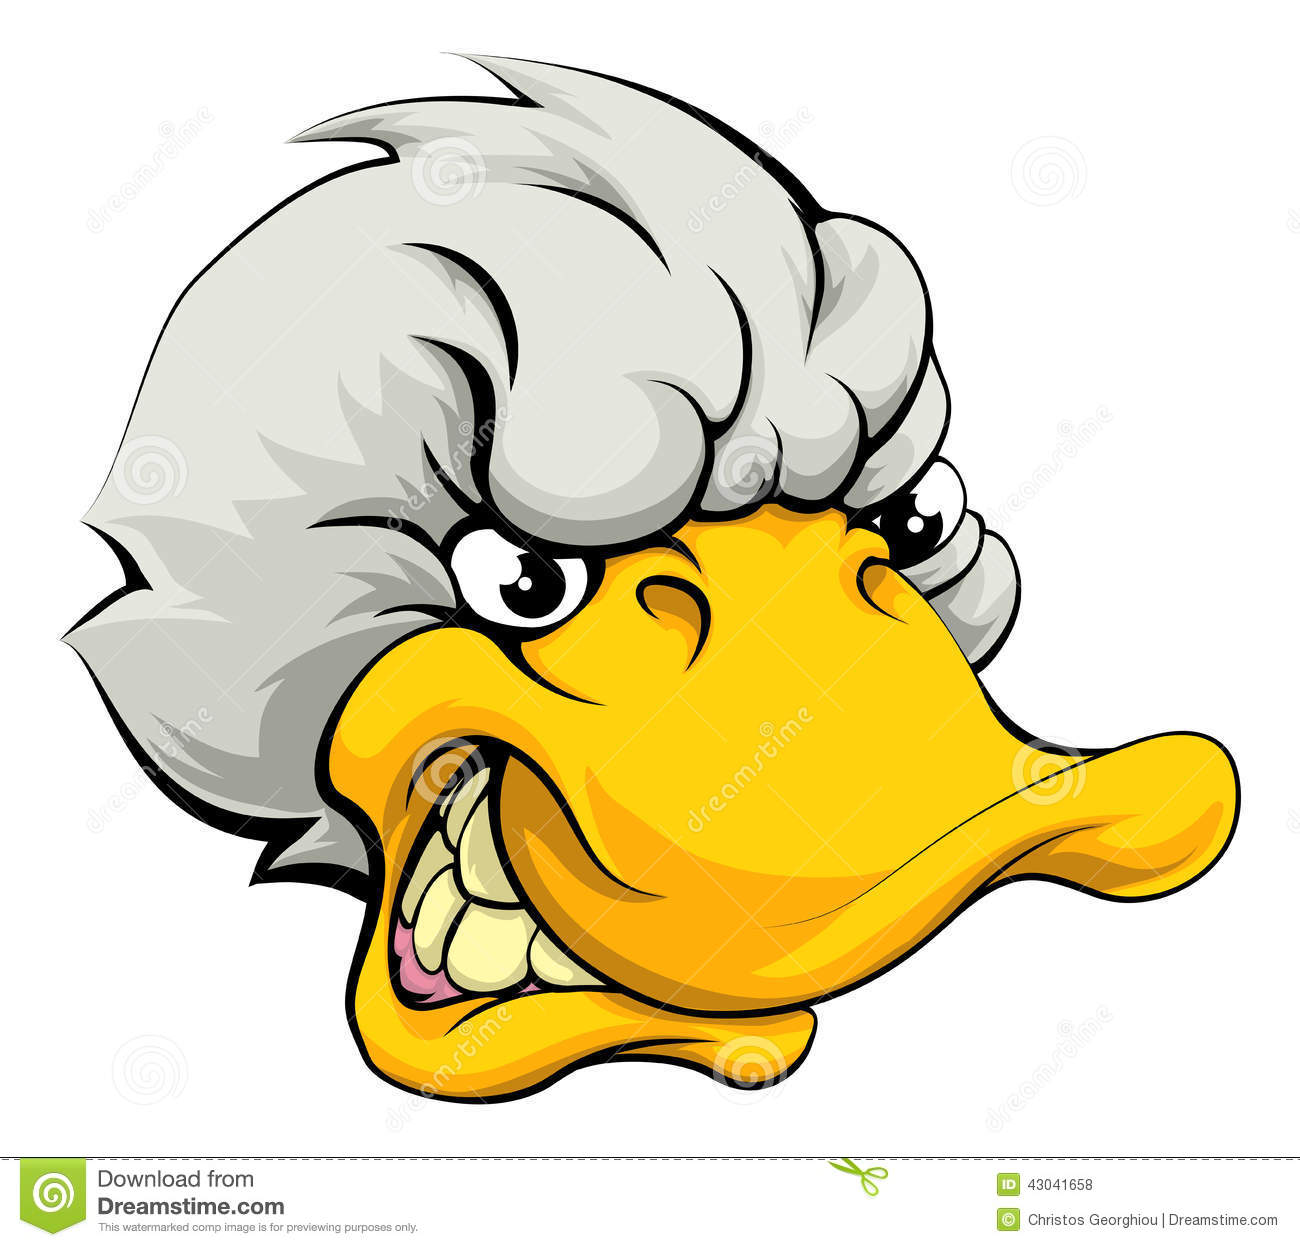 An Illustration Of A Mean Looking Duck Sports Mascot